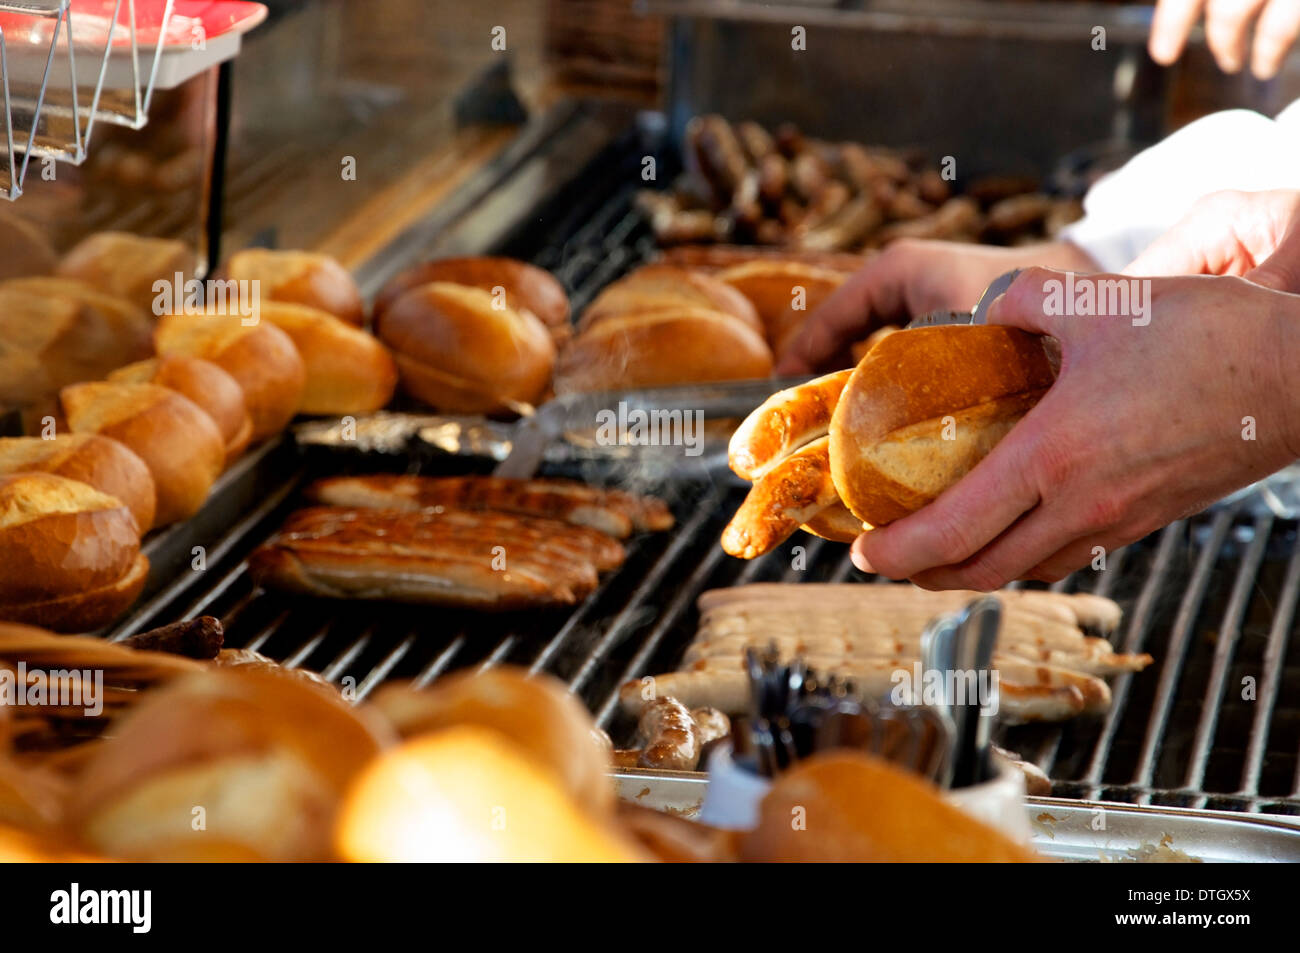 Fried Sausages (Bratwurst) being sold in a vending Stall in Germany. Stock Photo